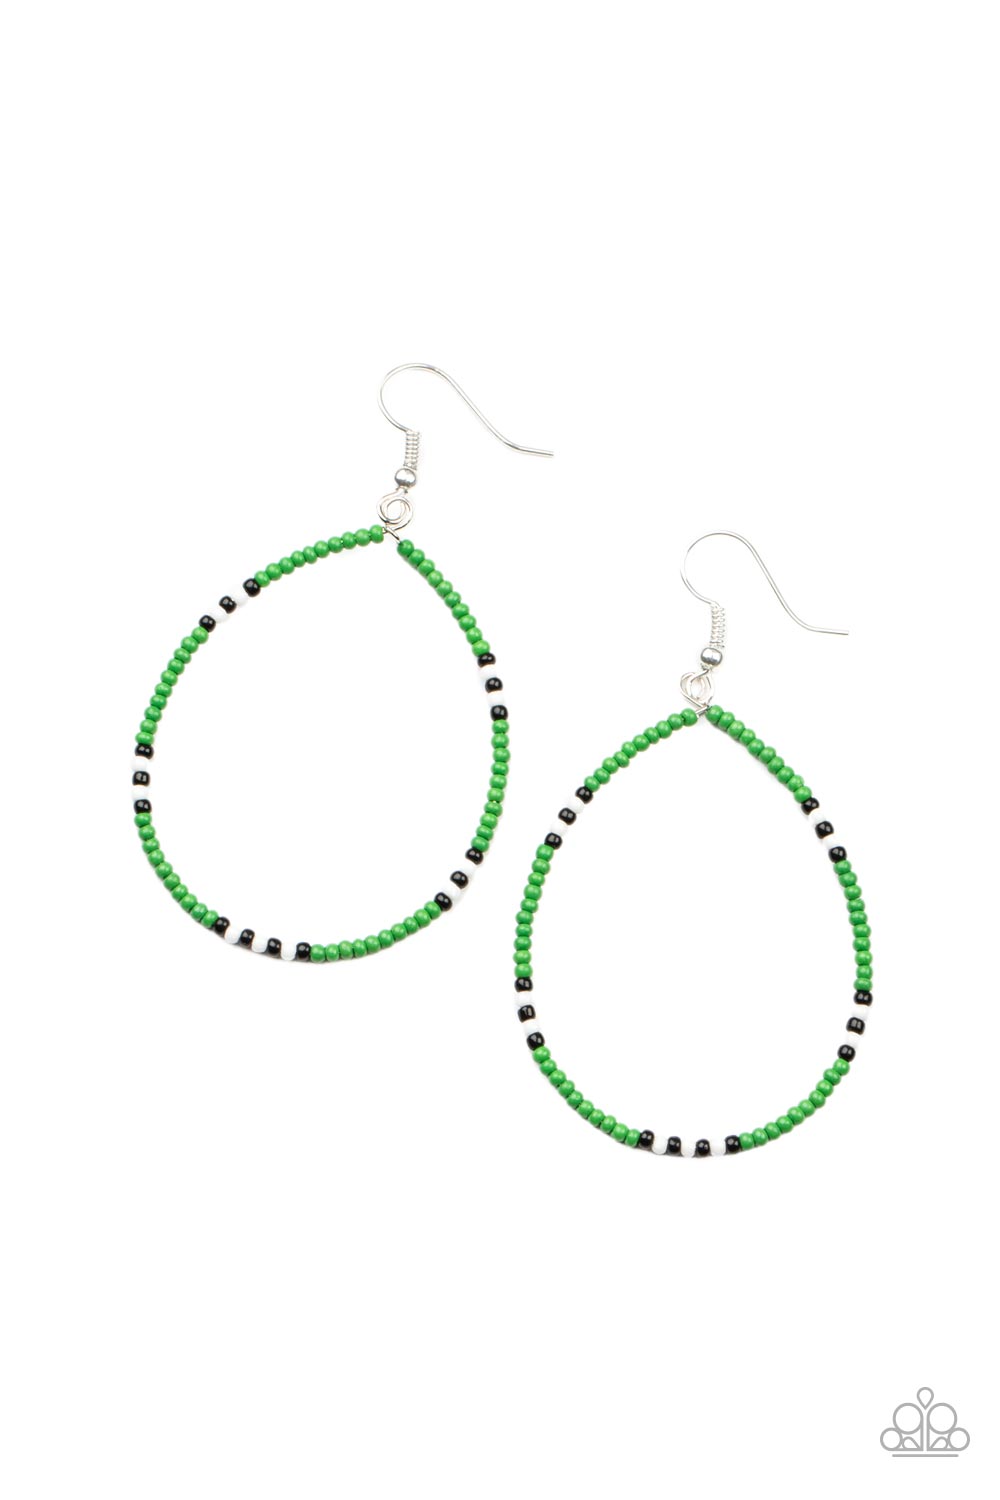 Keep Up The Good BEADWORK Green Seed Bead Earrings - Paparazzi Accessories- lightbox - CarasShop.com - $5 Jewelry by Cara Jewels